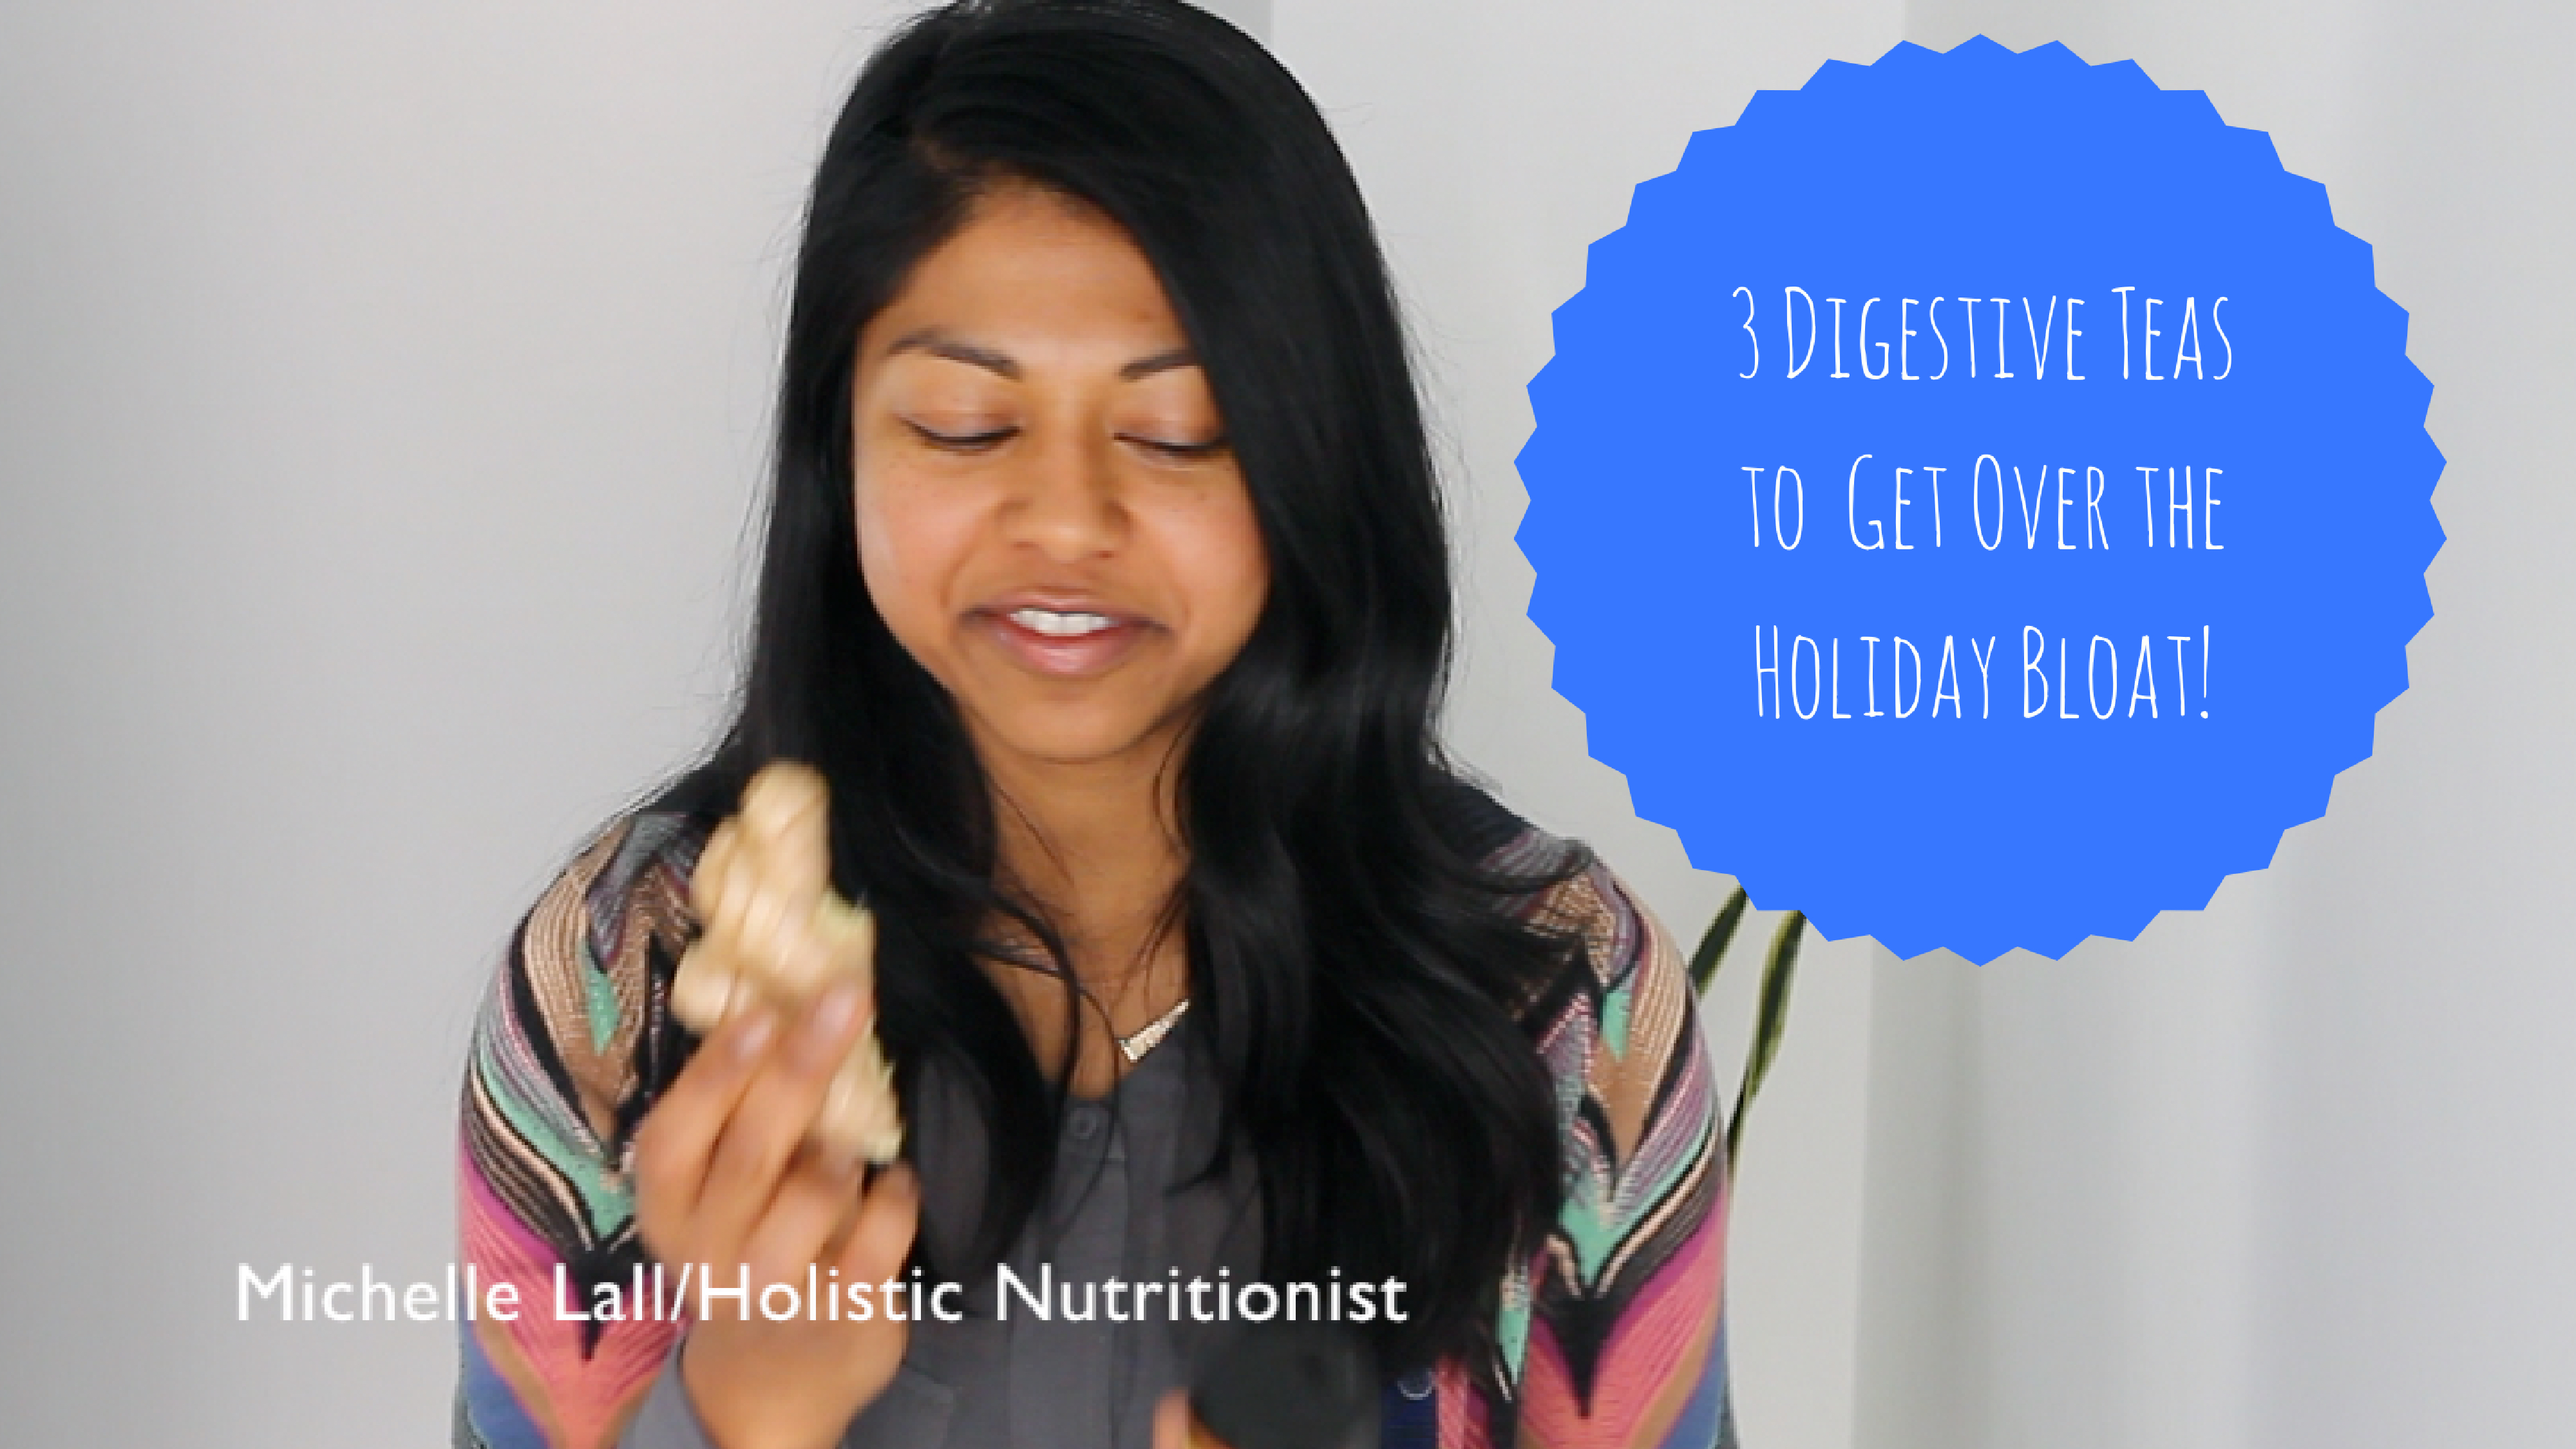 3 Digestive Teas to Get Over the Holiday Bloat!